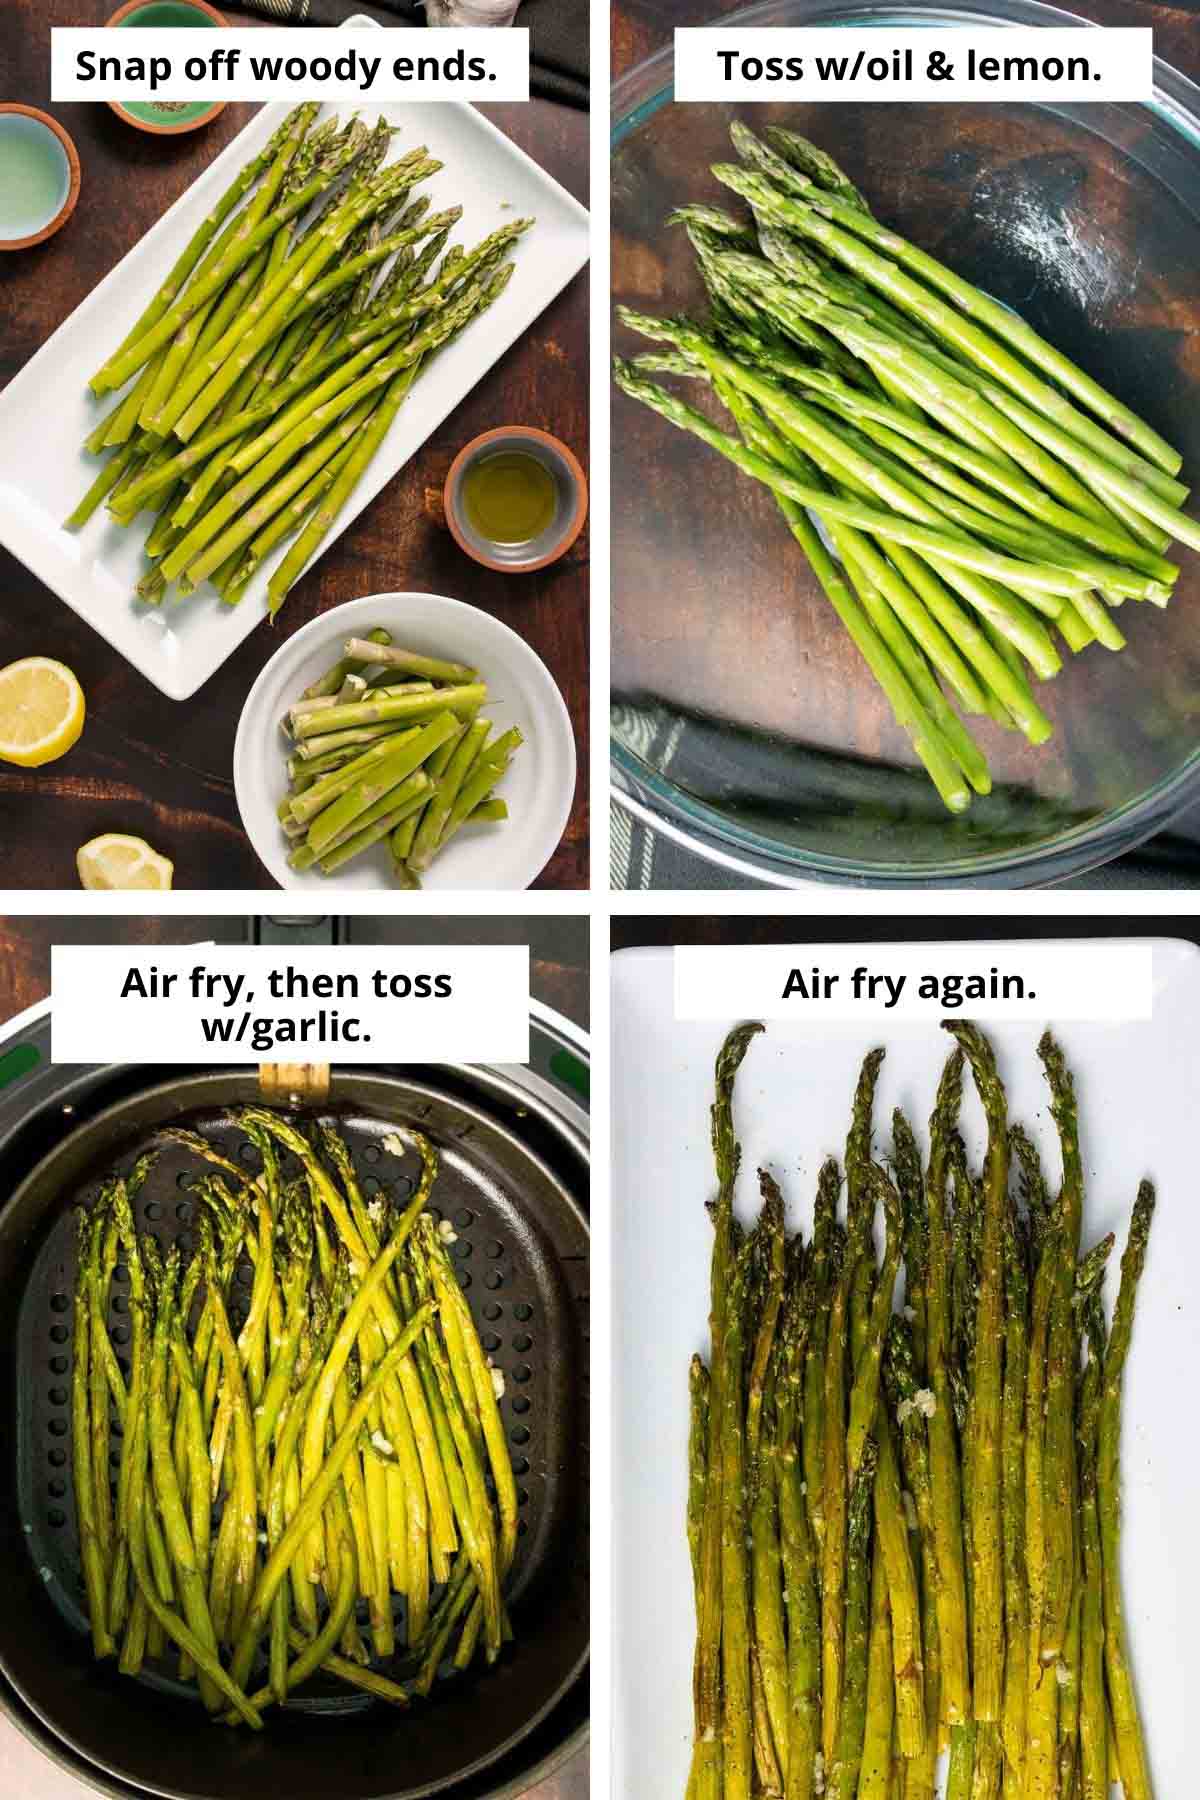 collage showing asparagus with ends snapped off, tossed with lemon and oil in a bowl, asparagus in air fryer basket and then cooked on a plate